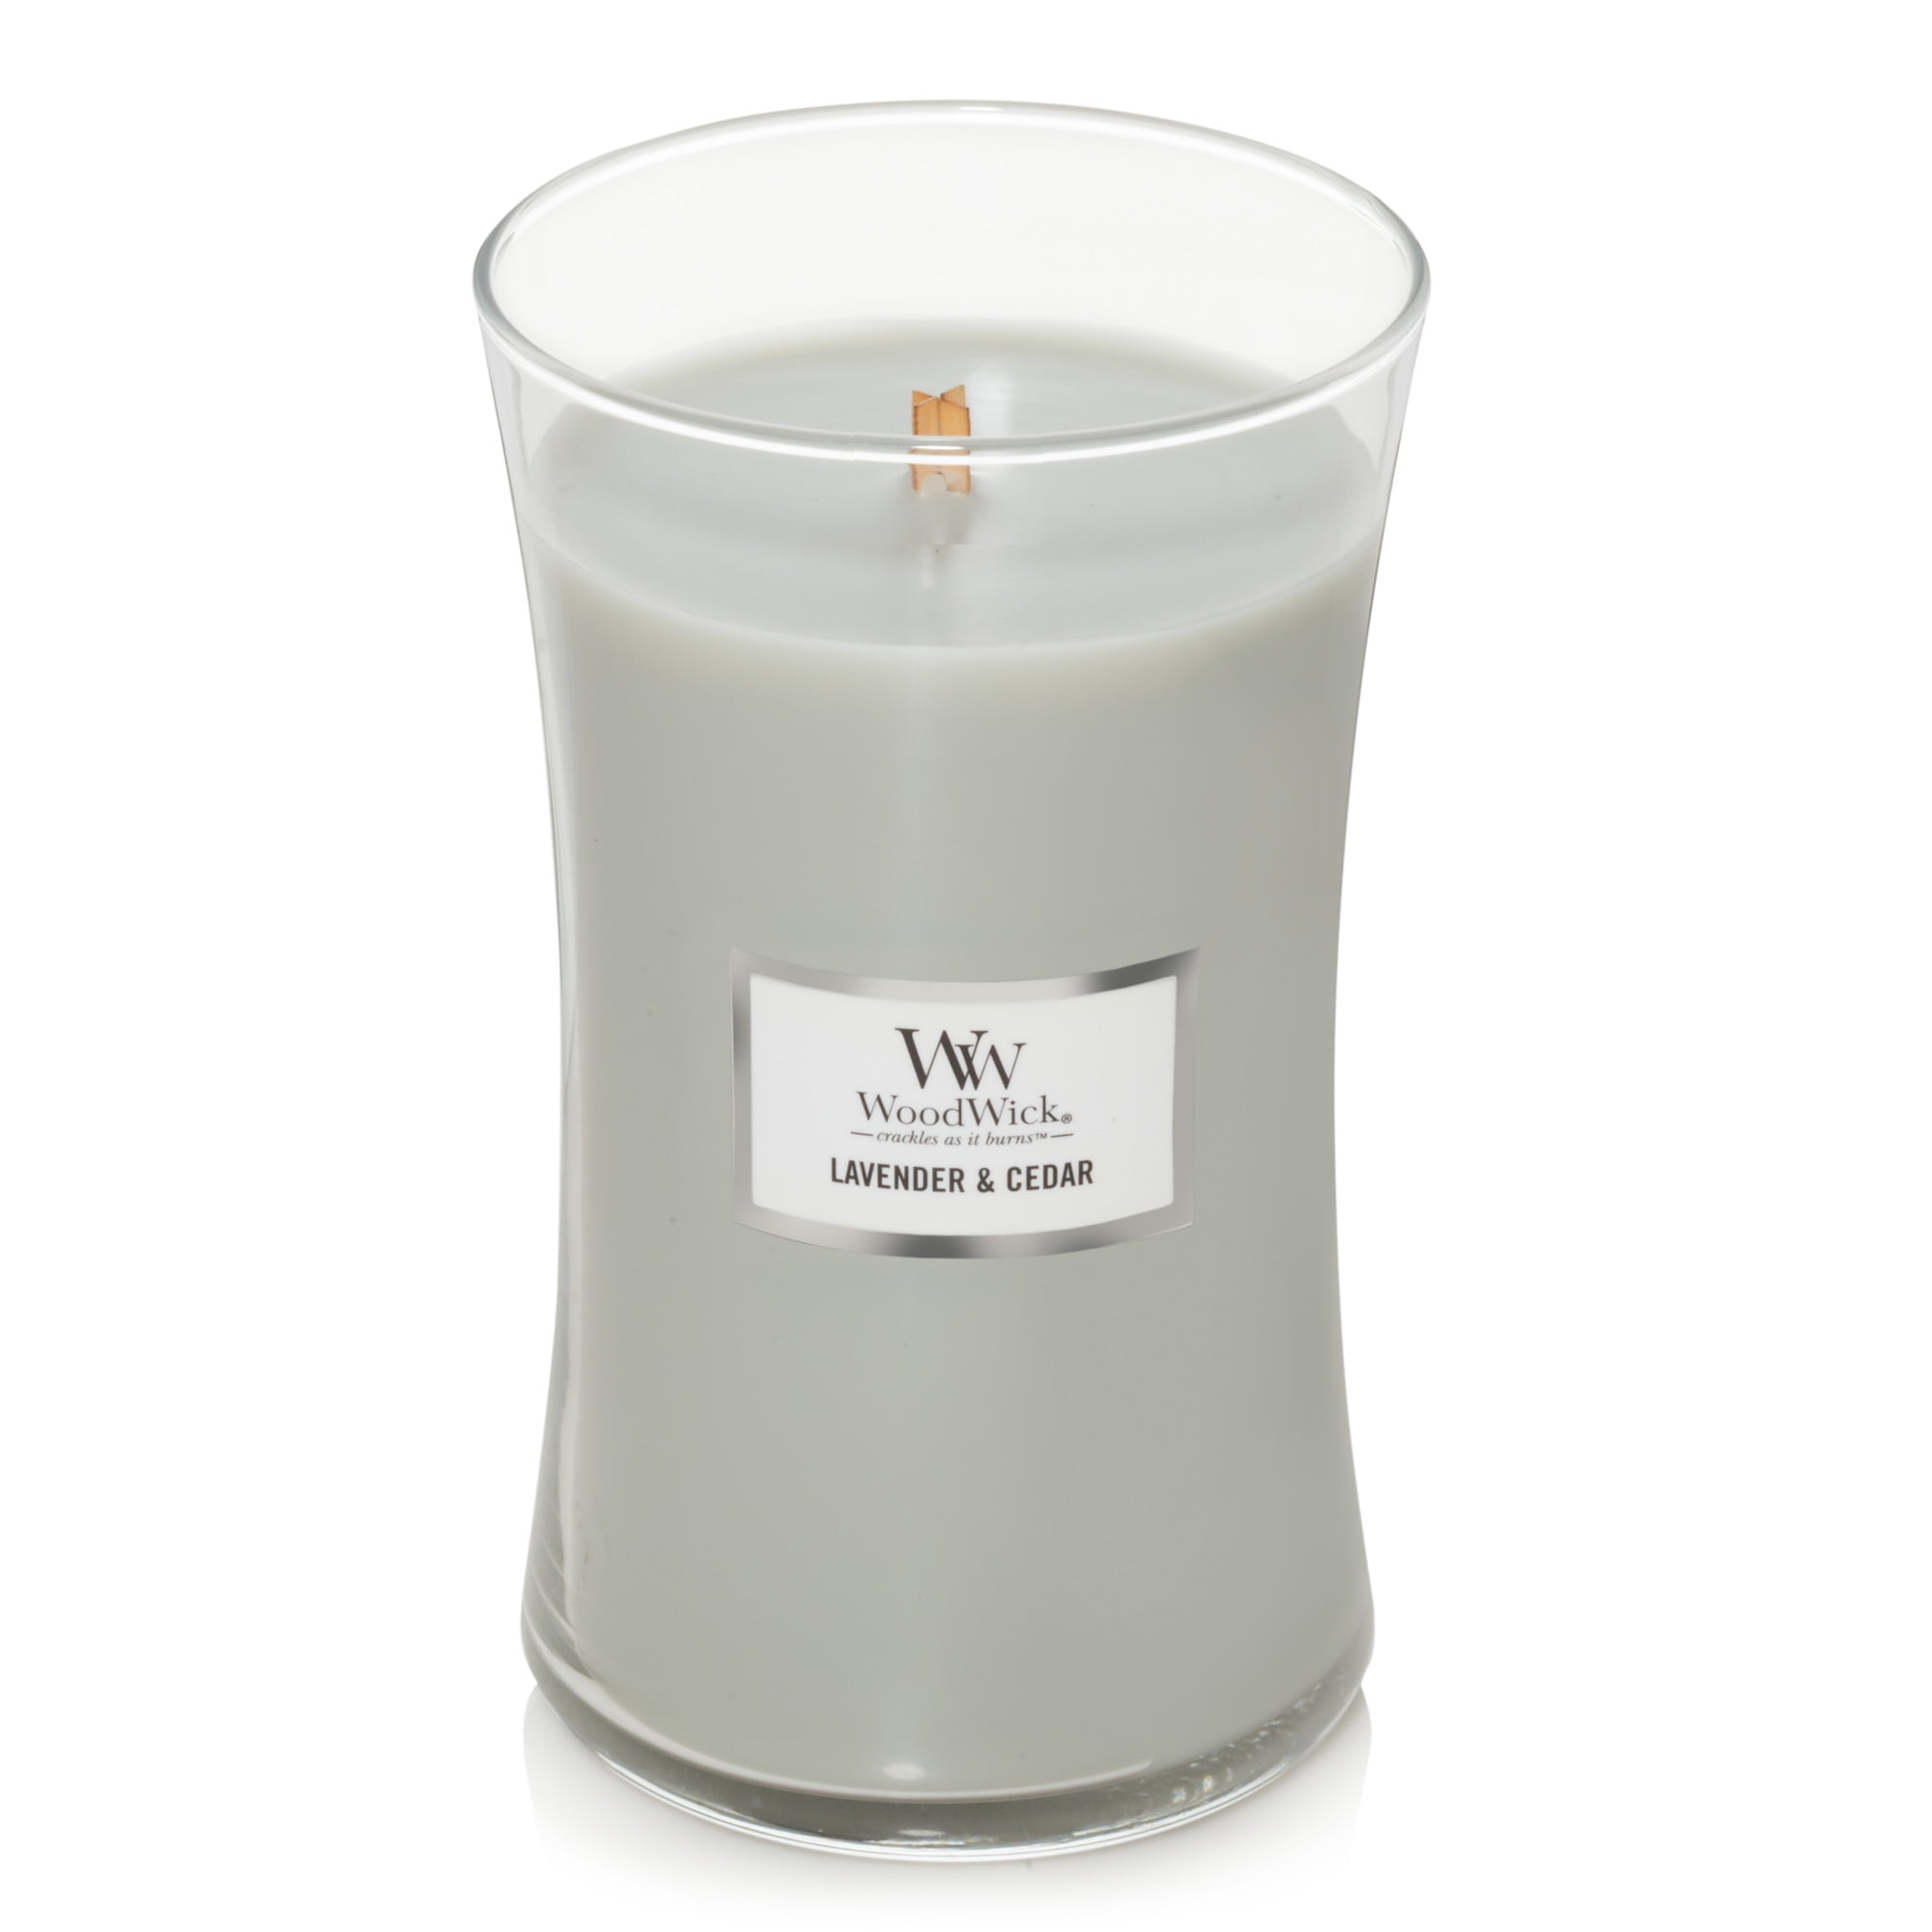  WoodWick Large Hourglass Candle, Vanilla Sea Salt - Premium Soy  Blend Wax, Pluswick Innovation Wood Wick, Made in USA : Home & Kitchen